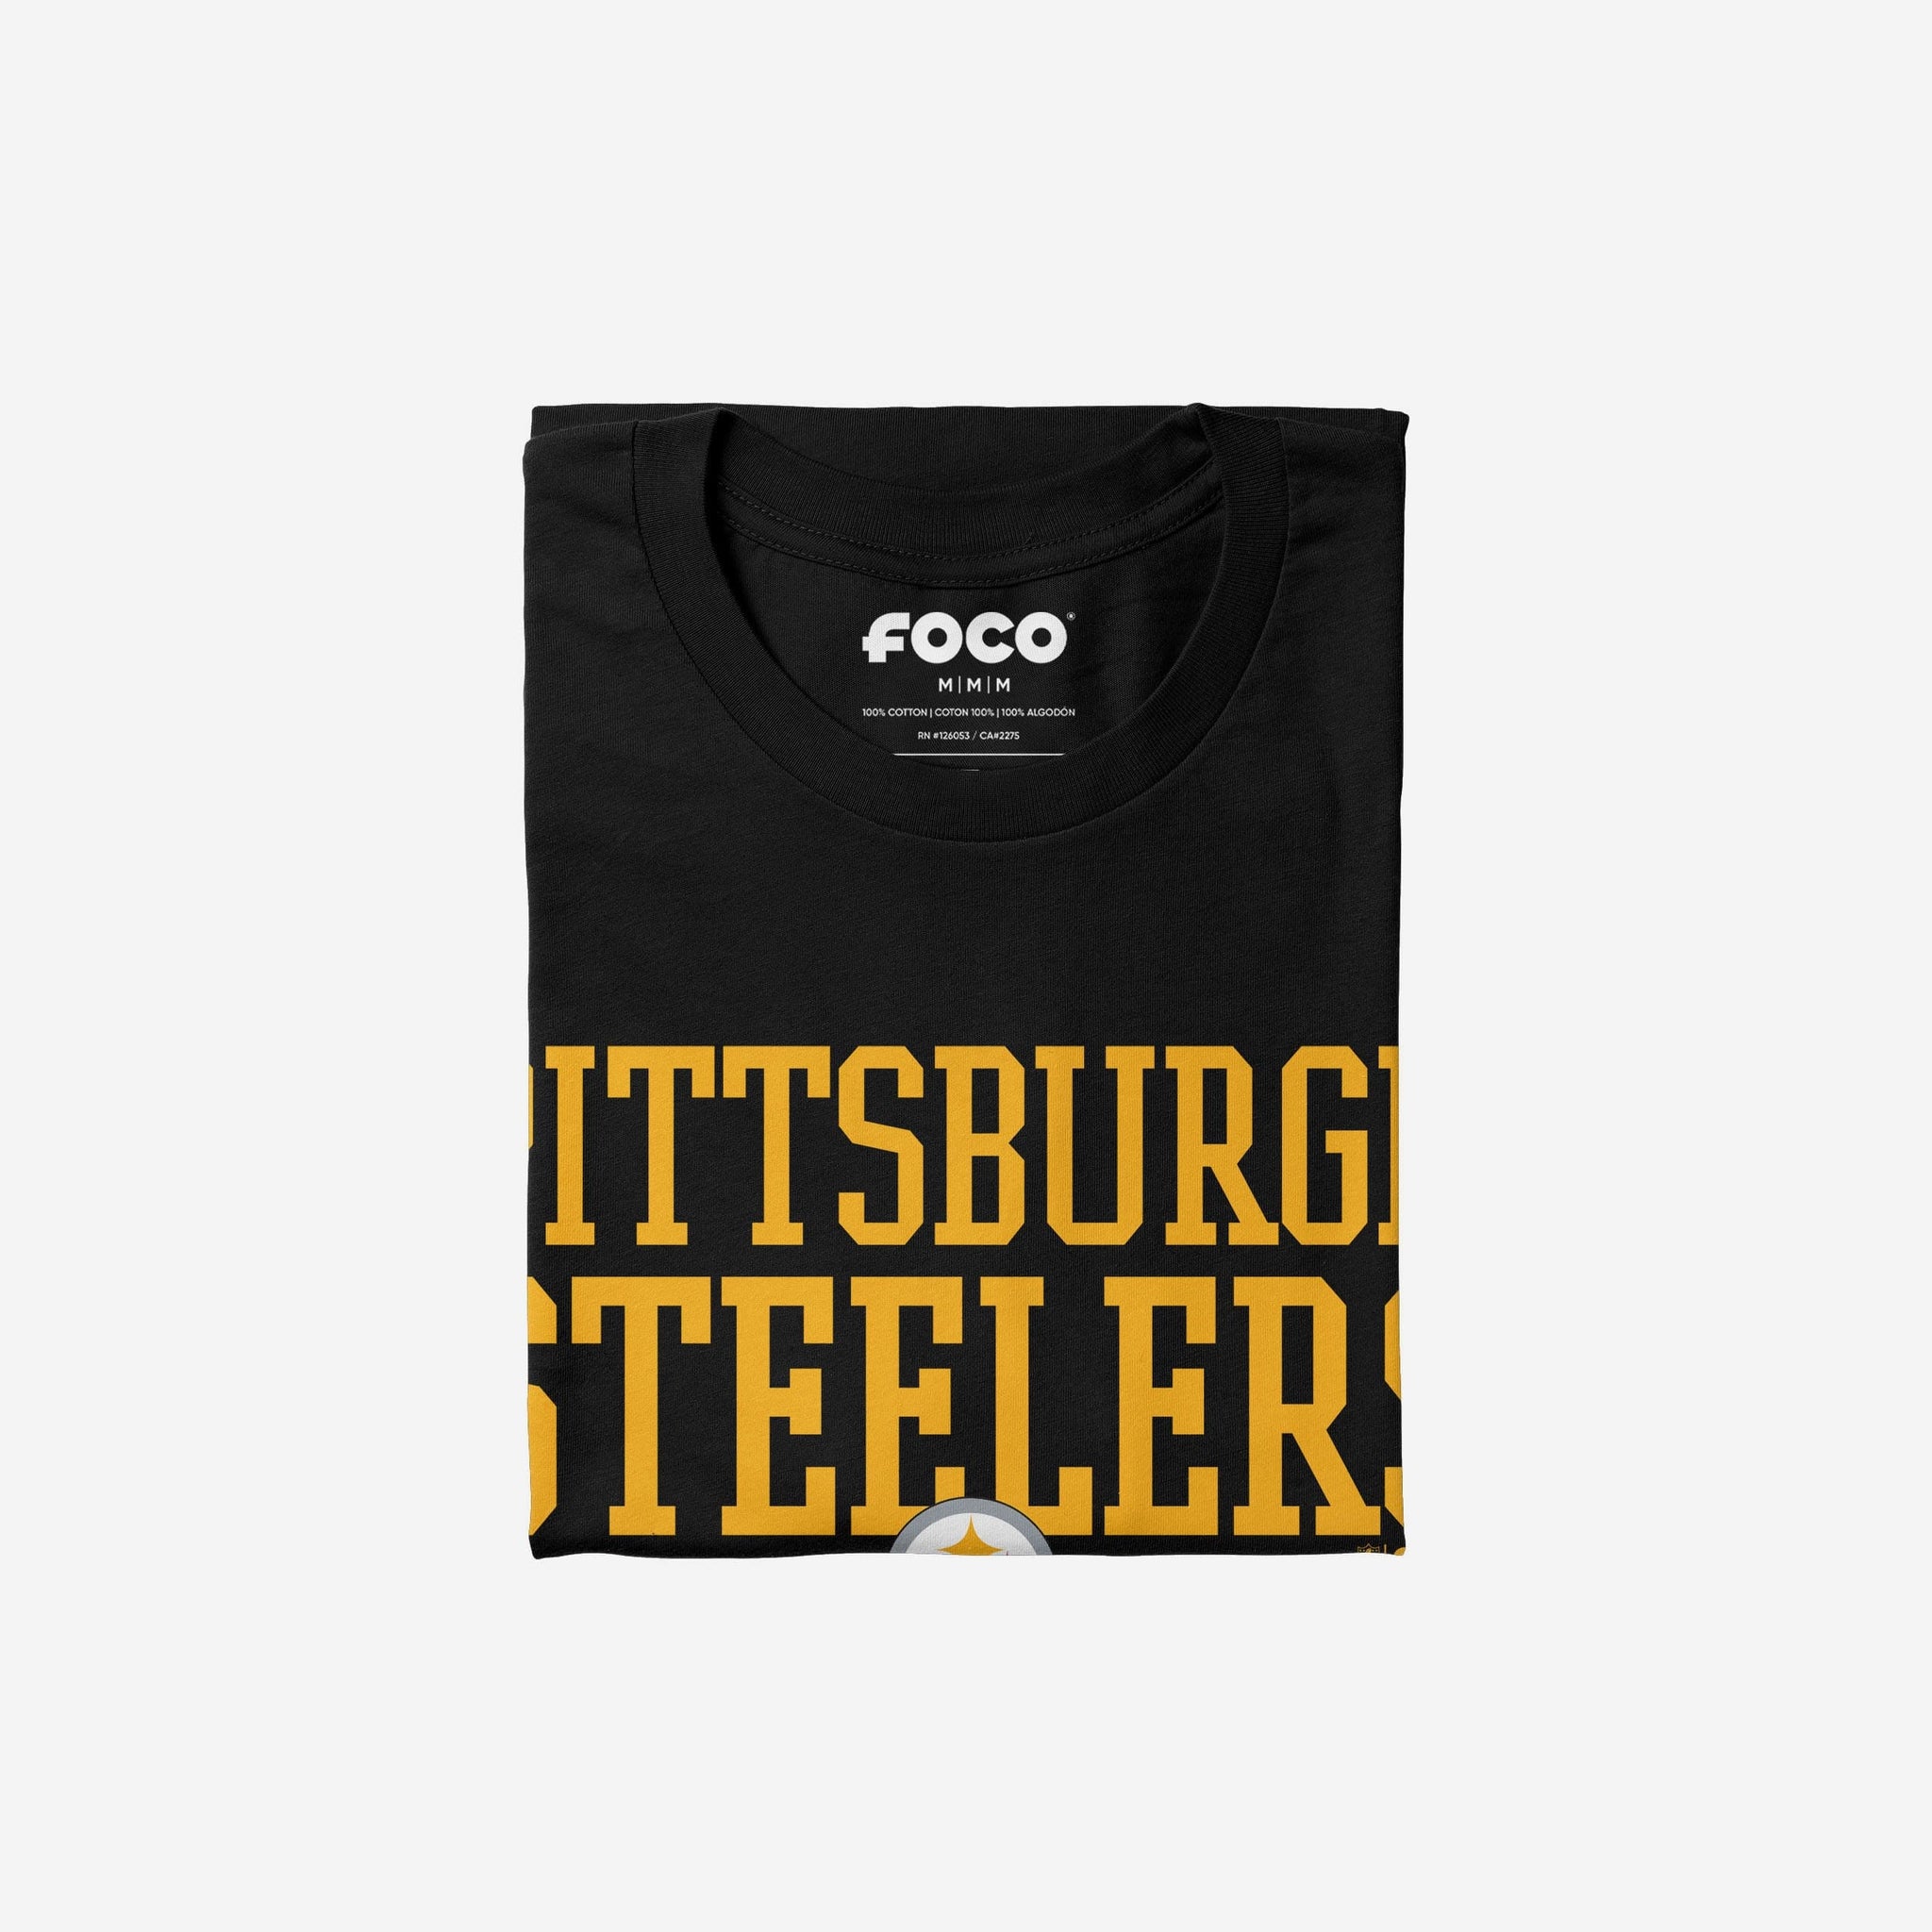 Pittsburgh Steelers Apparel, Collectibles, and Fan Gear. FOCO